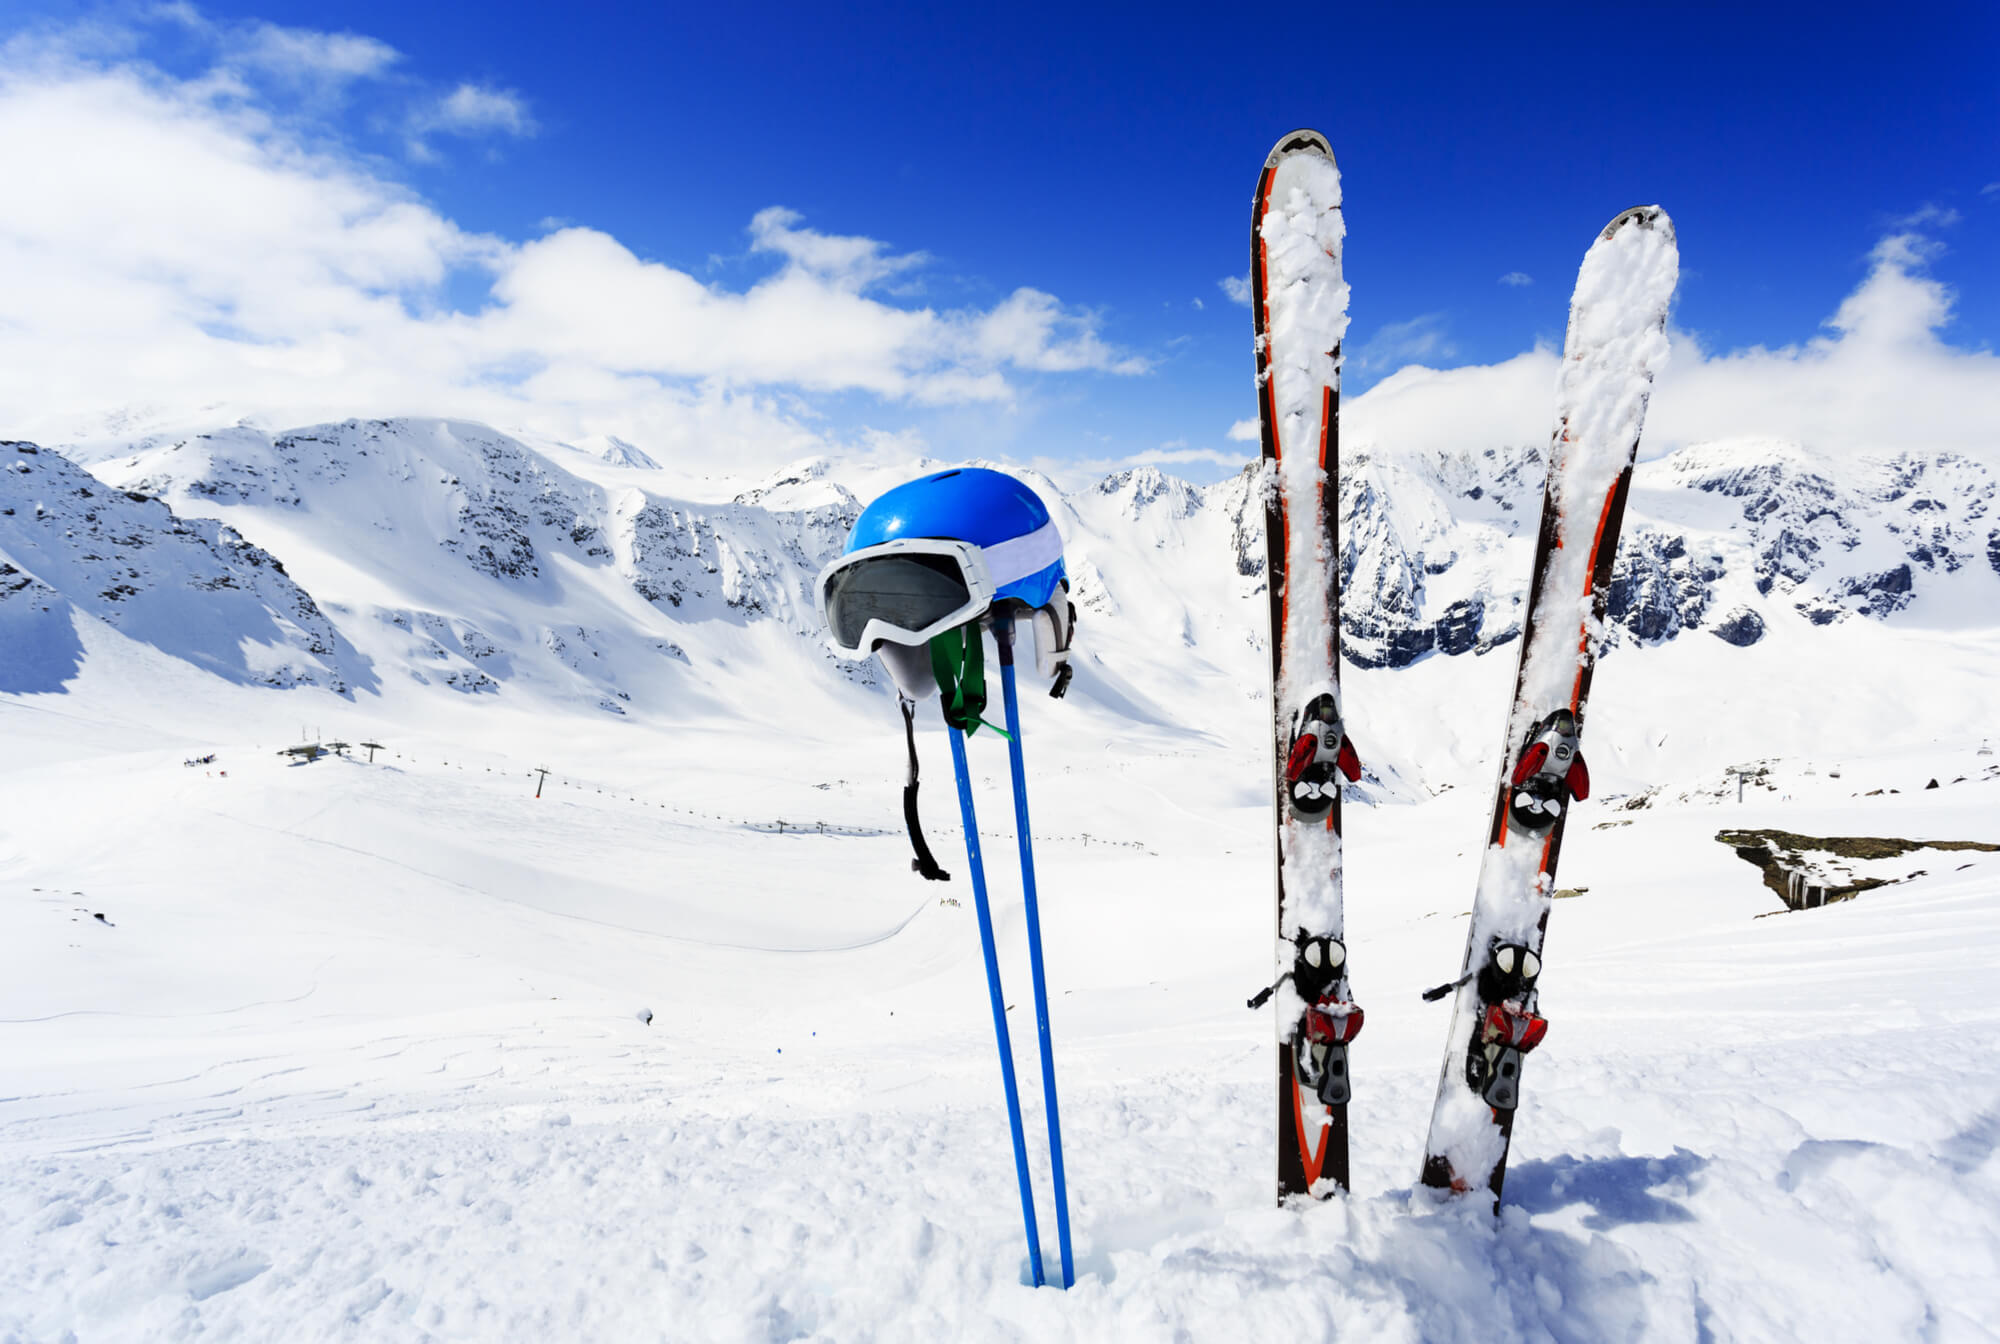 Skis with poles planted in snow and a hanging helmet with goggles with mountains in the background